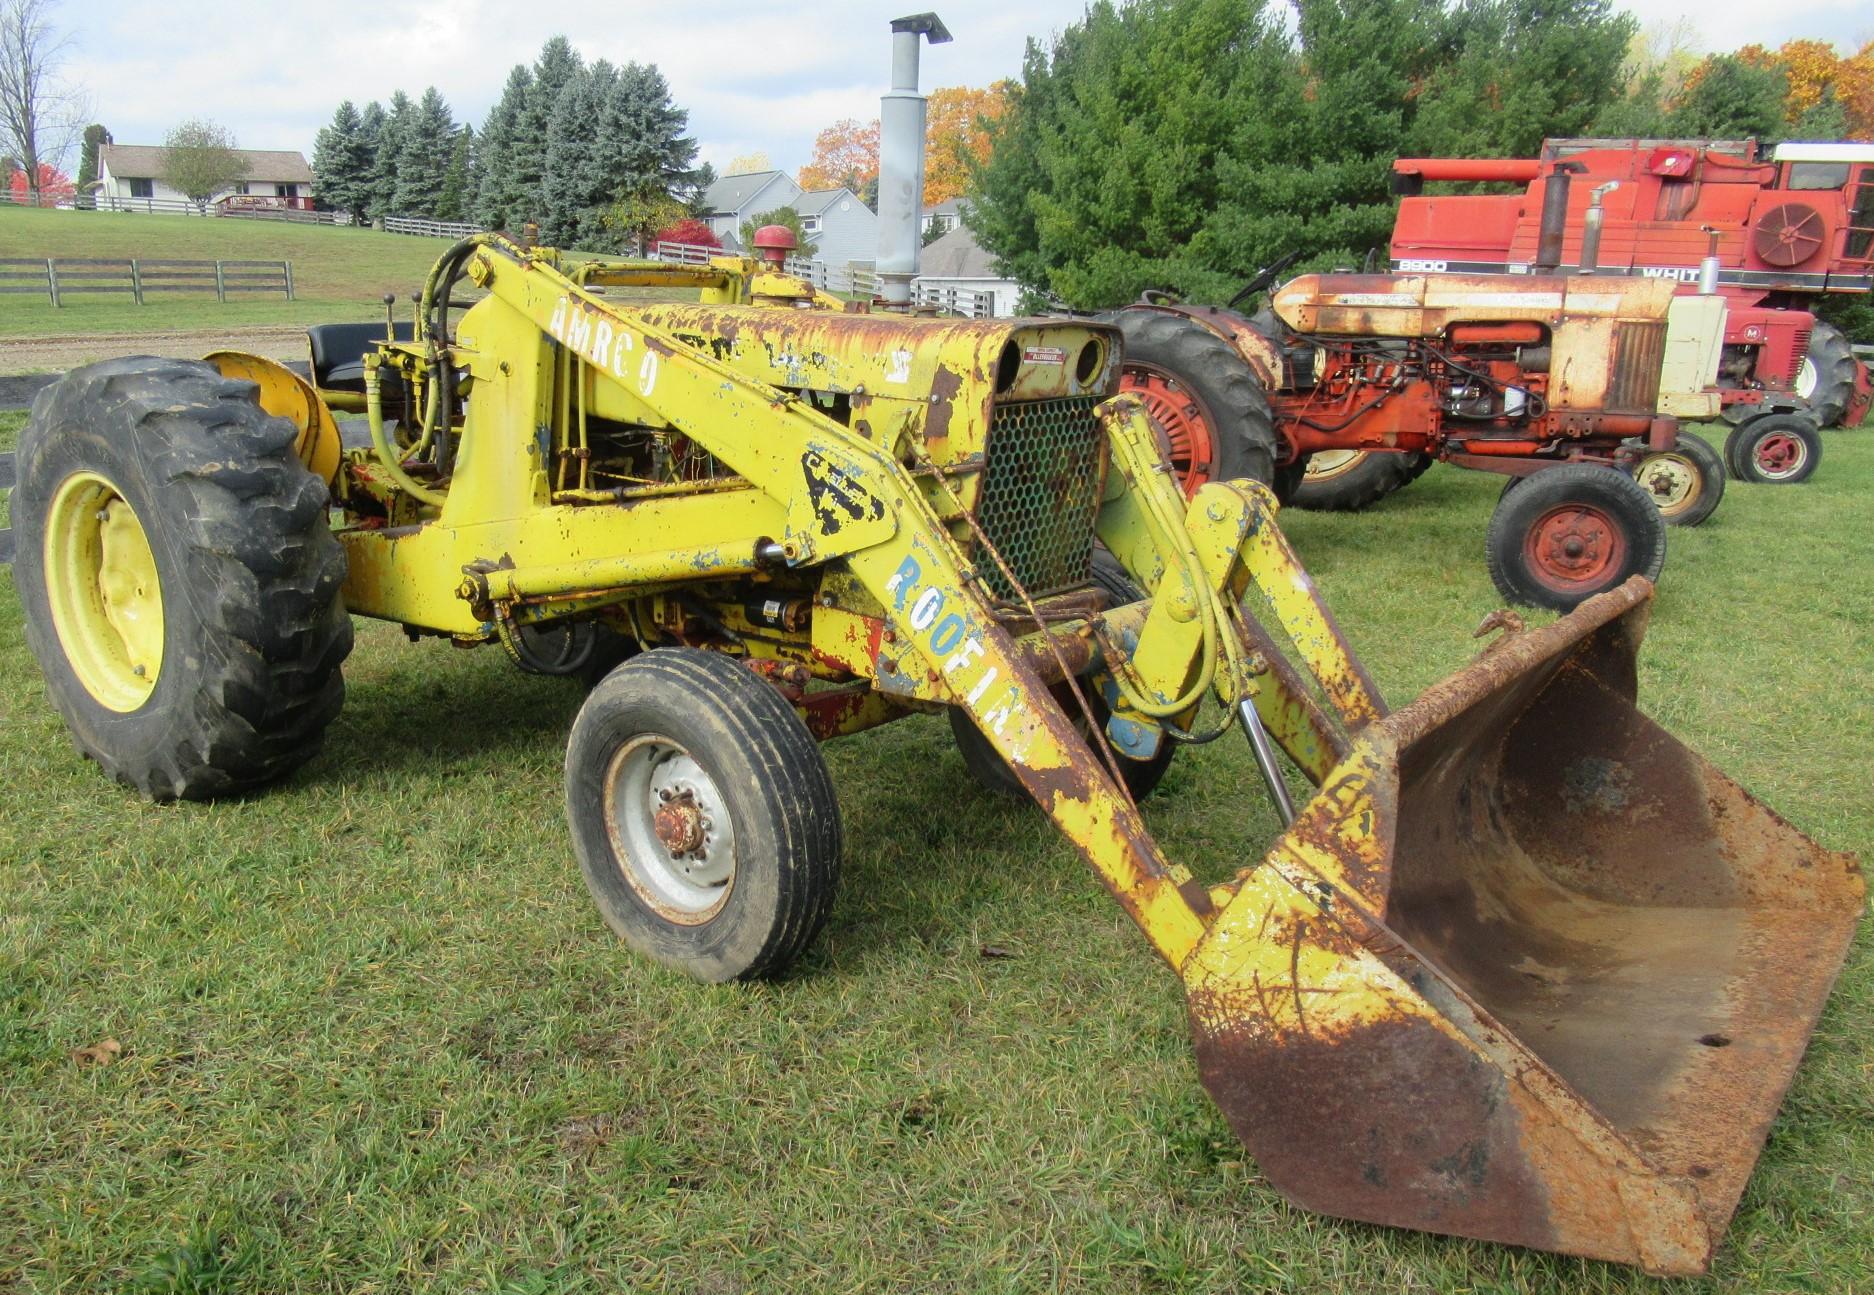 1966 Case 430 Gas with Loader.